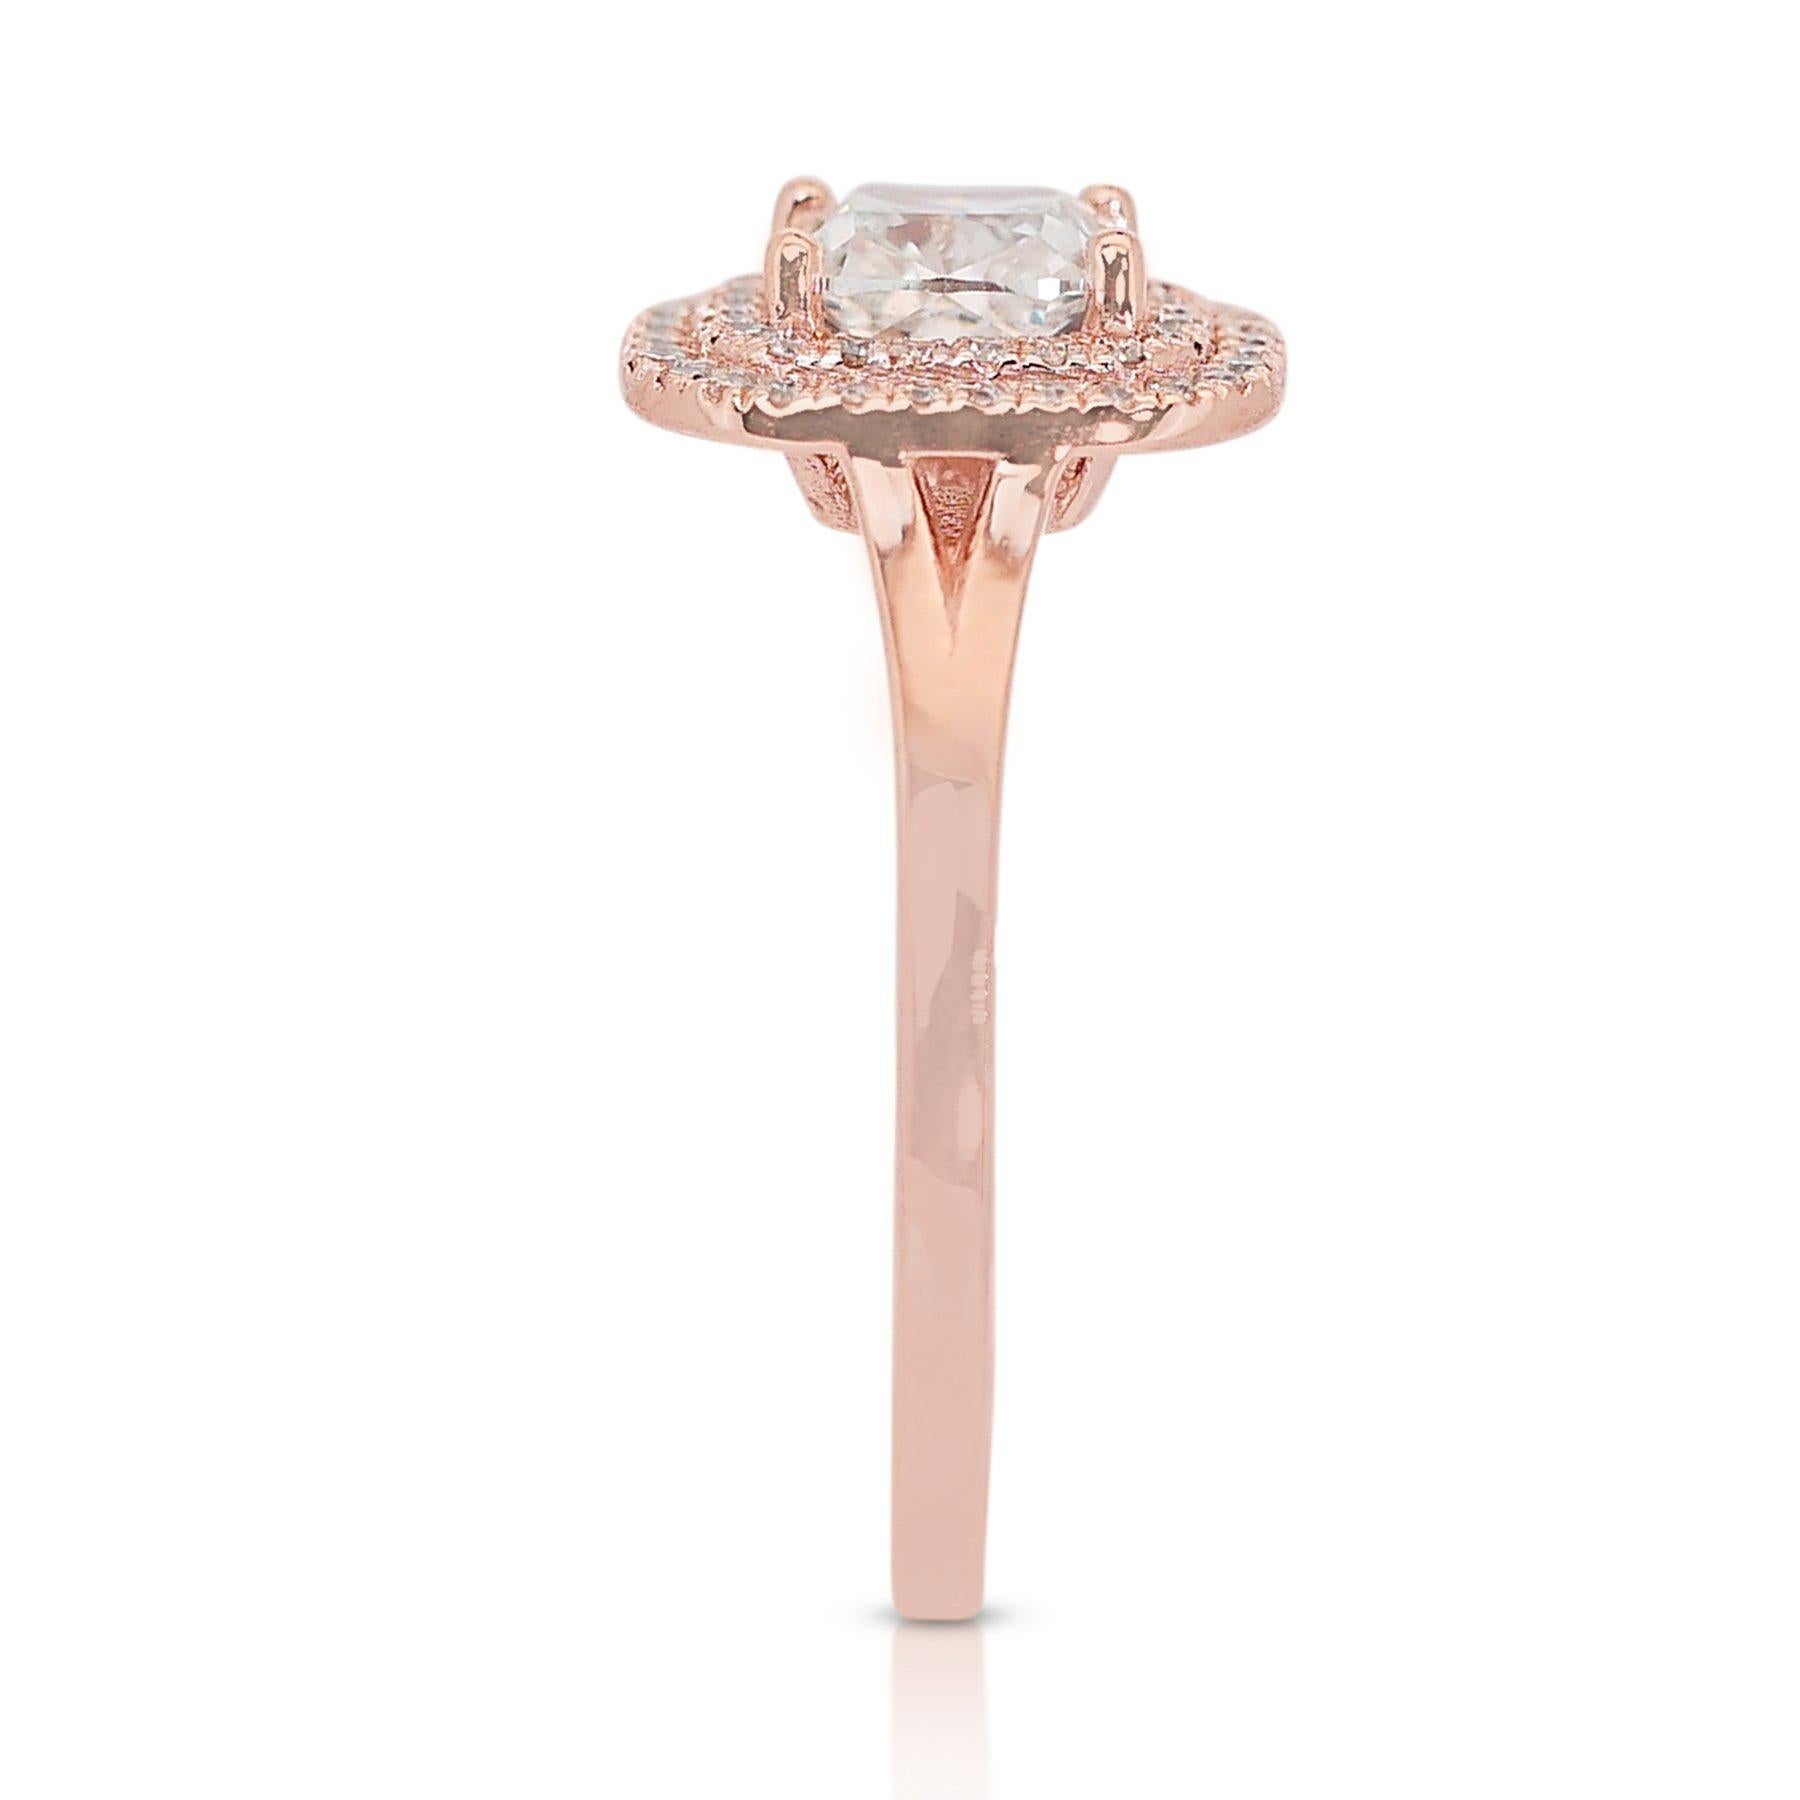 Elegant 1.41ct Diamonds Double Halo Ring in 18k Rose Gold - GIA Certified For Sale 2